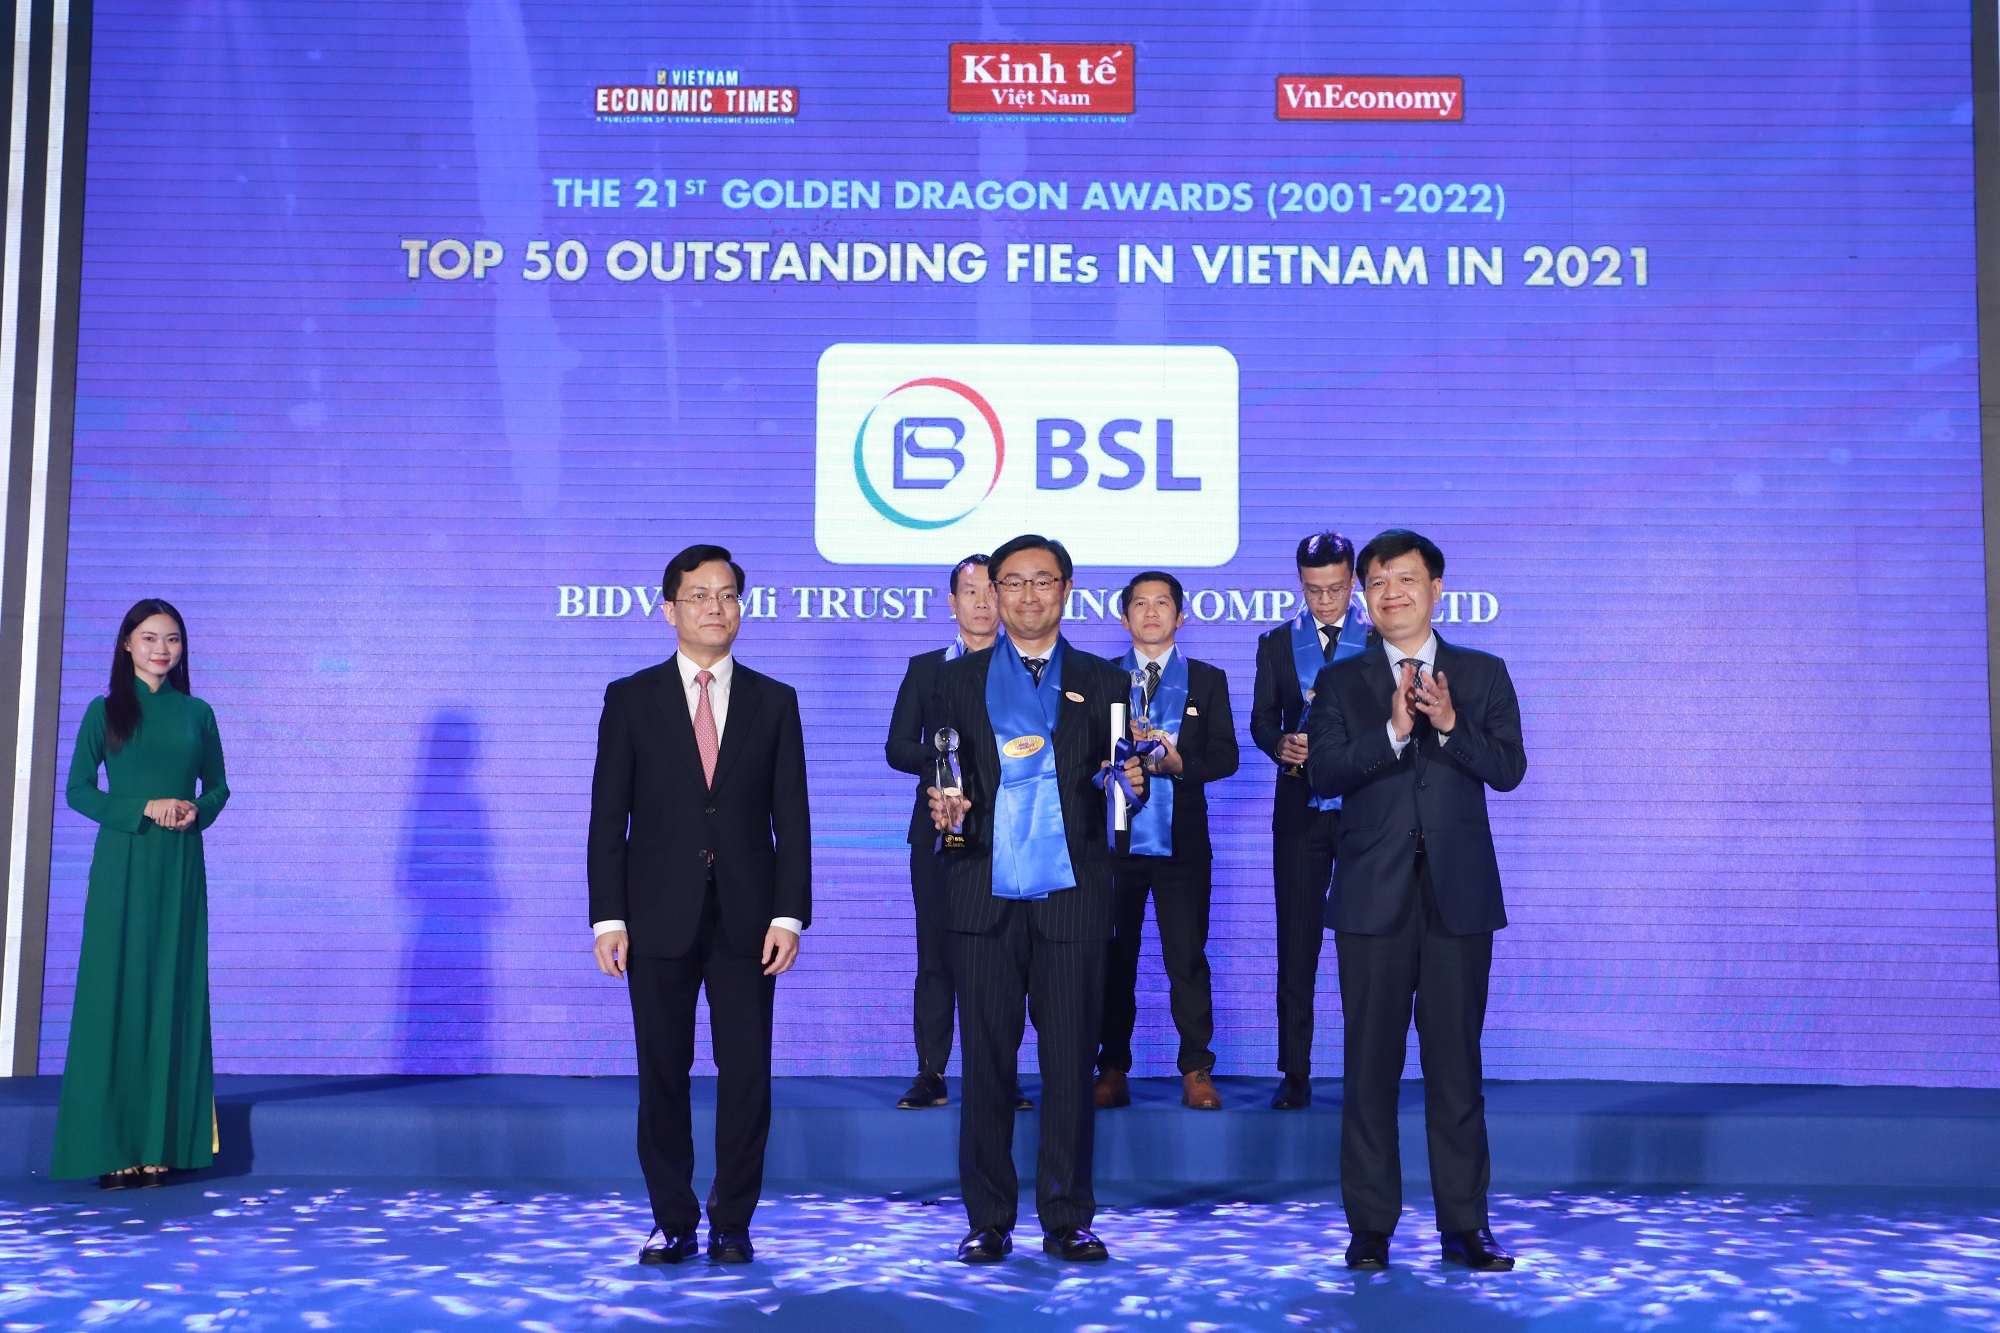 BIDV-SuMi TRUST Leasing Company (BSL) was named “Trusted Financial Services Provider” at Golden Dragon Awards 2022